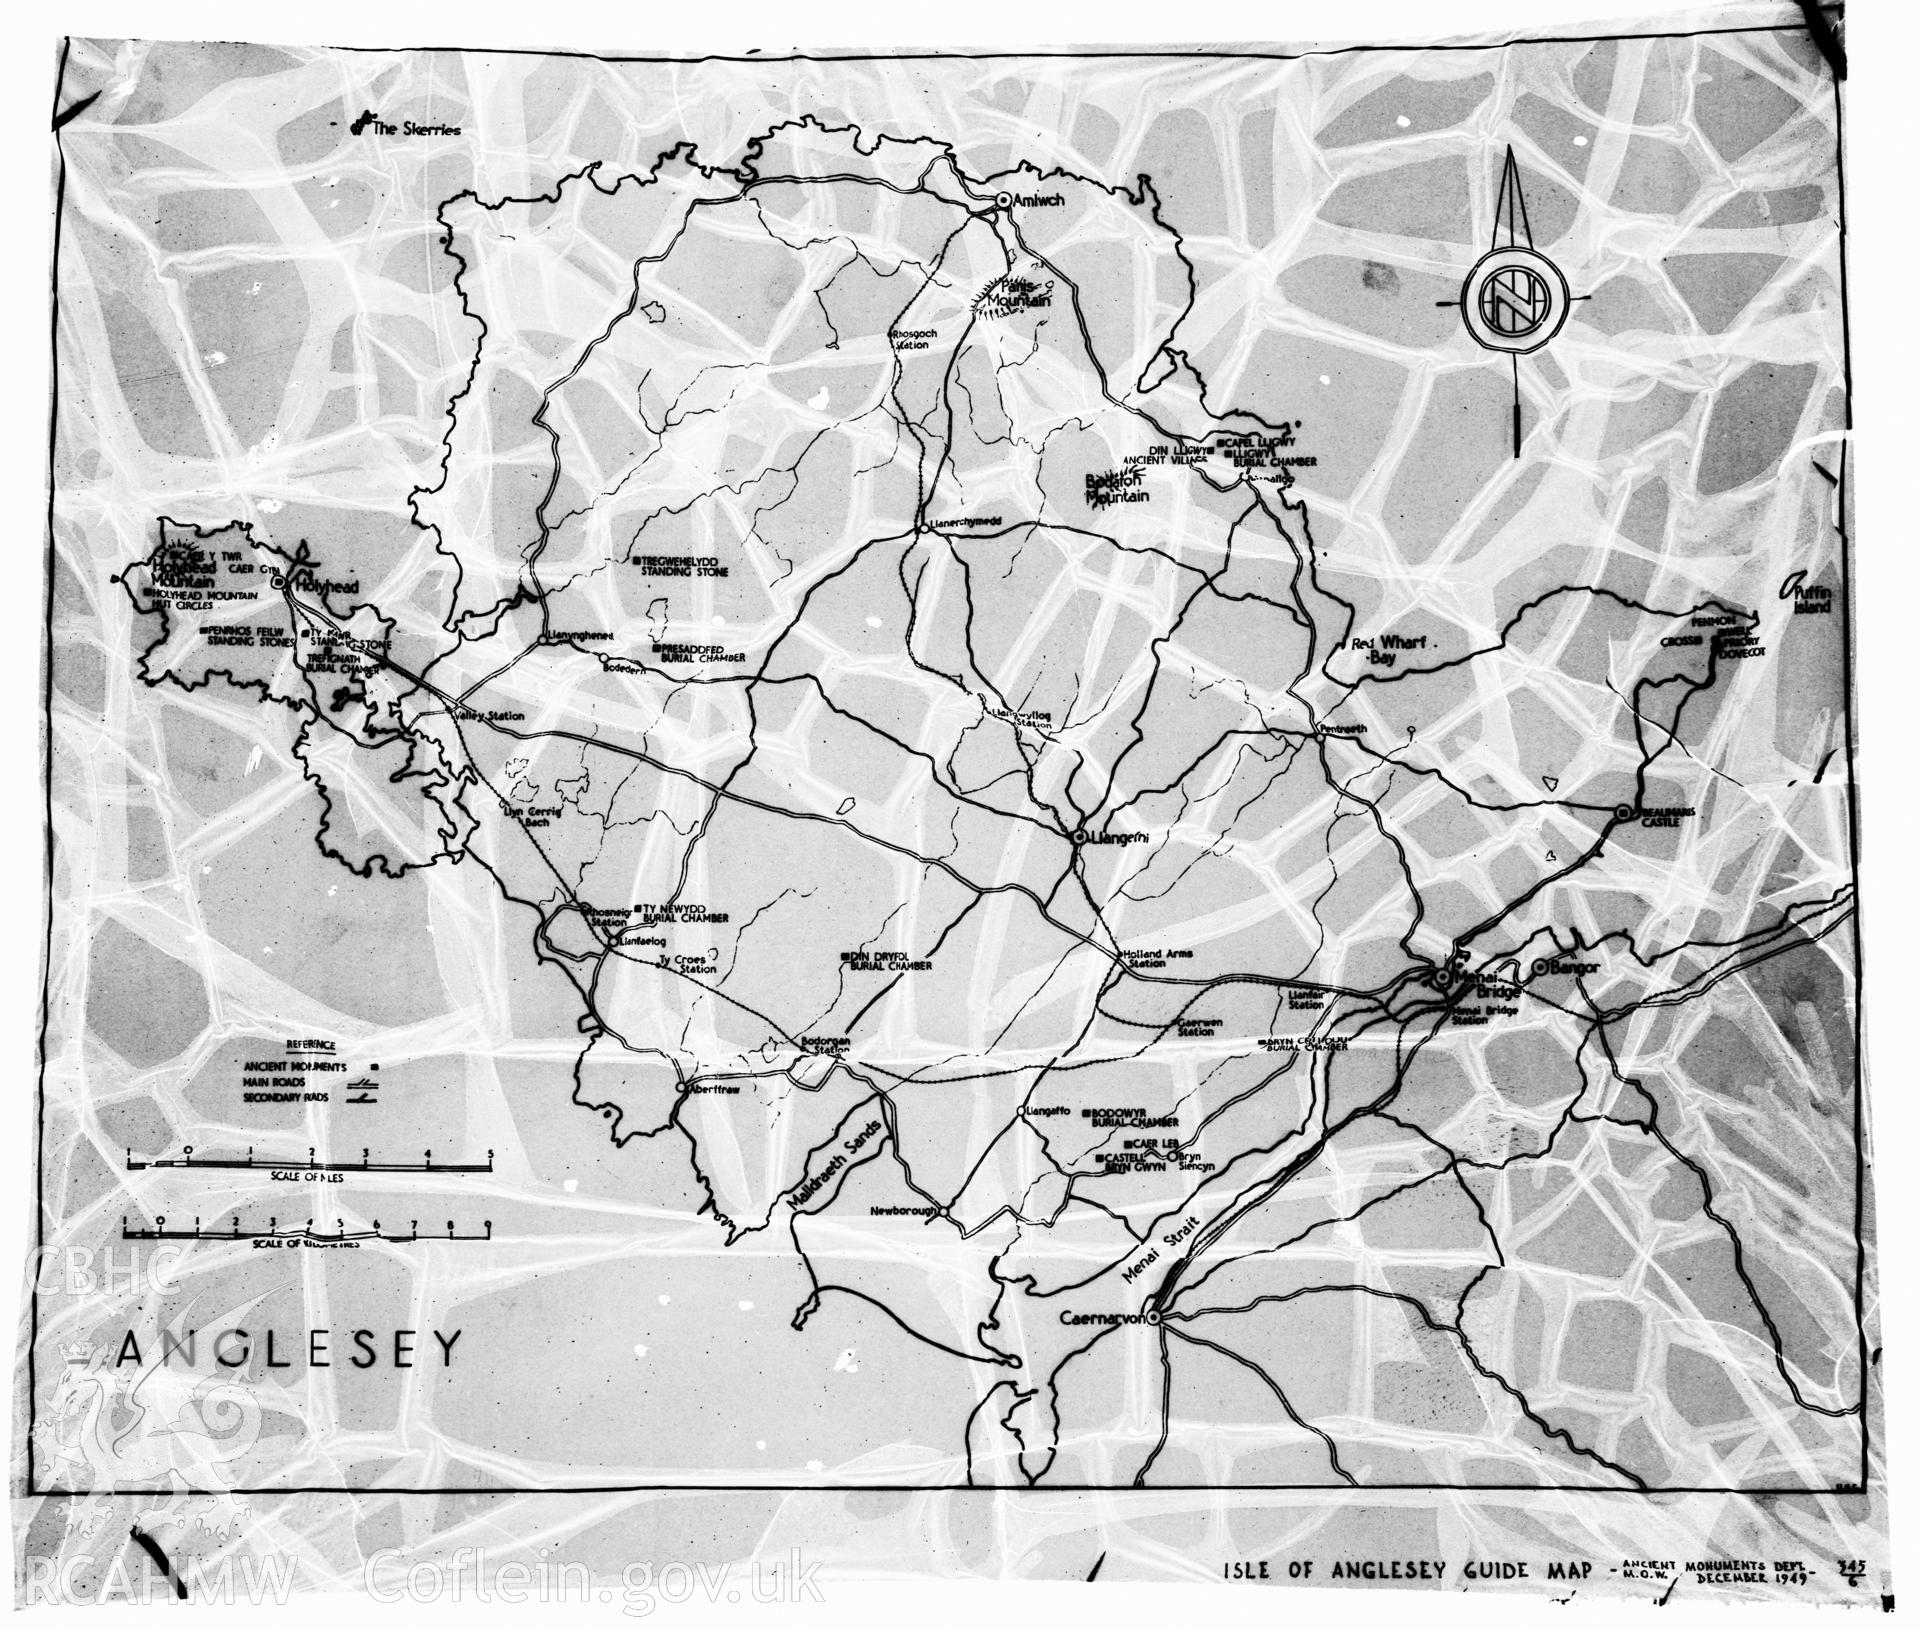 D.O.E. black and white negative showing a map of Anglesey as published in a  Guide Book of 1949.